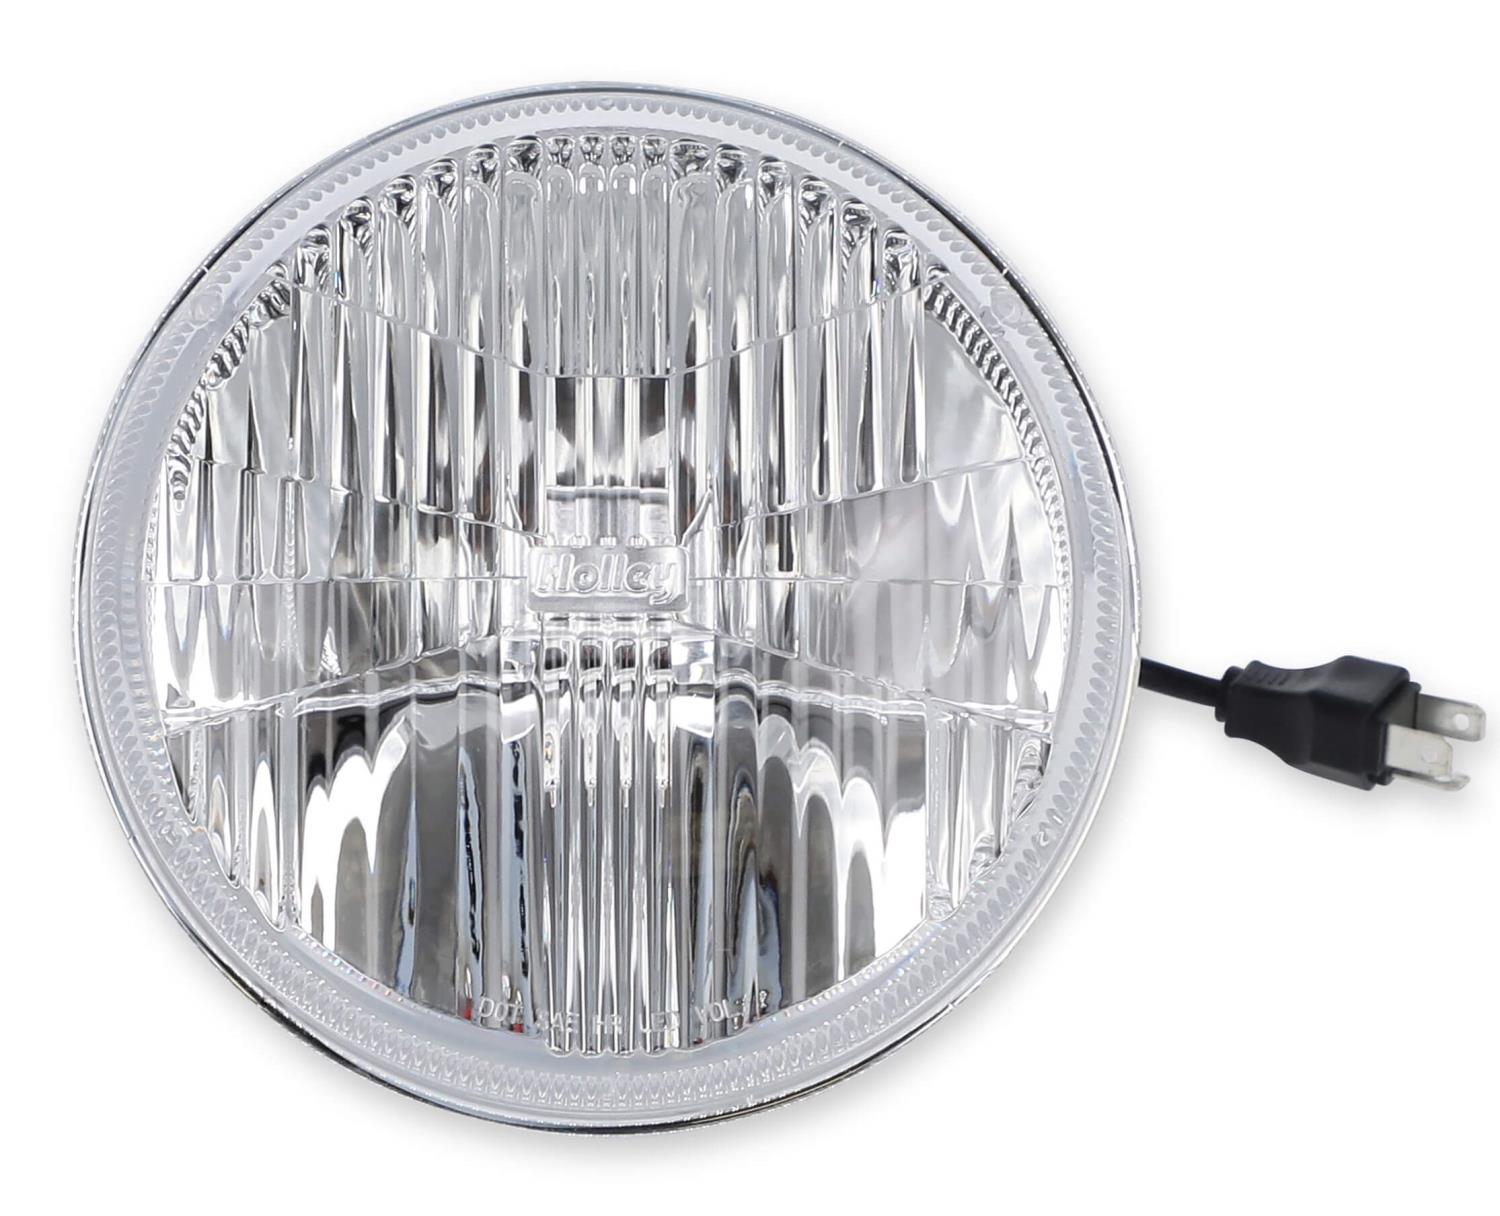 LFRB155 RetroBright LED 7 in. Round Headlight for